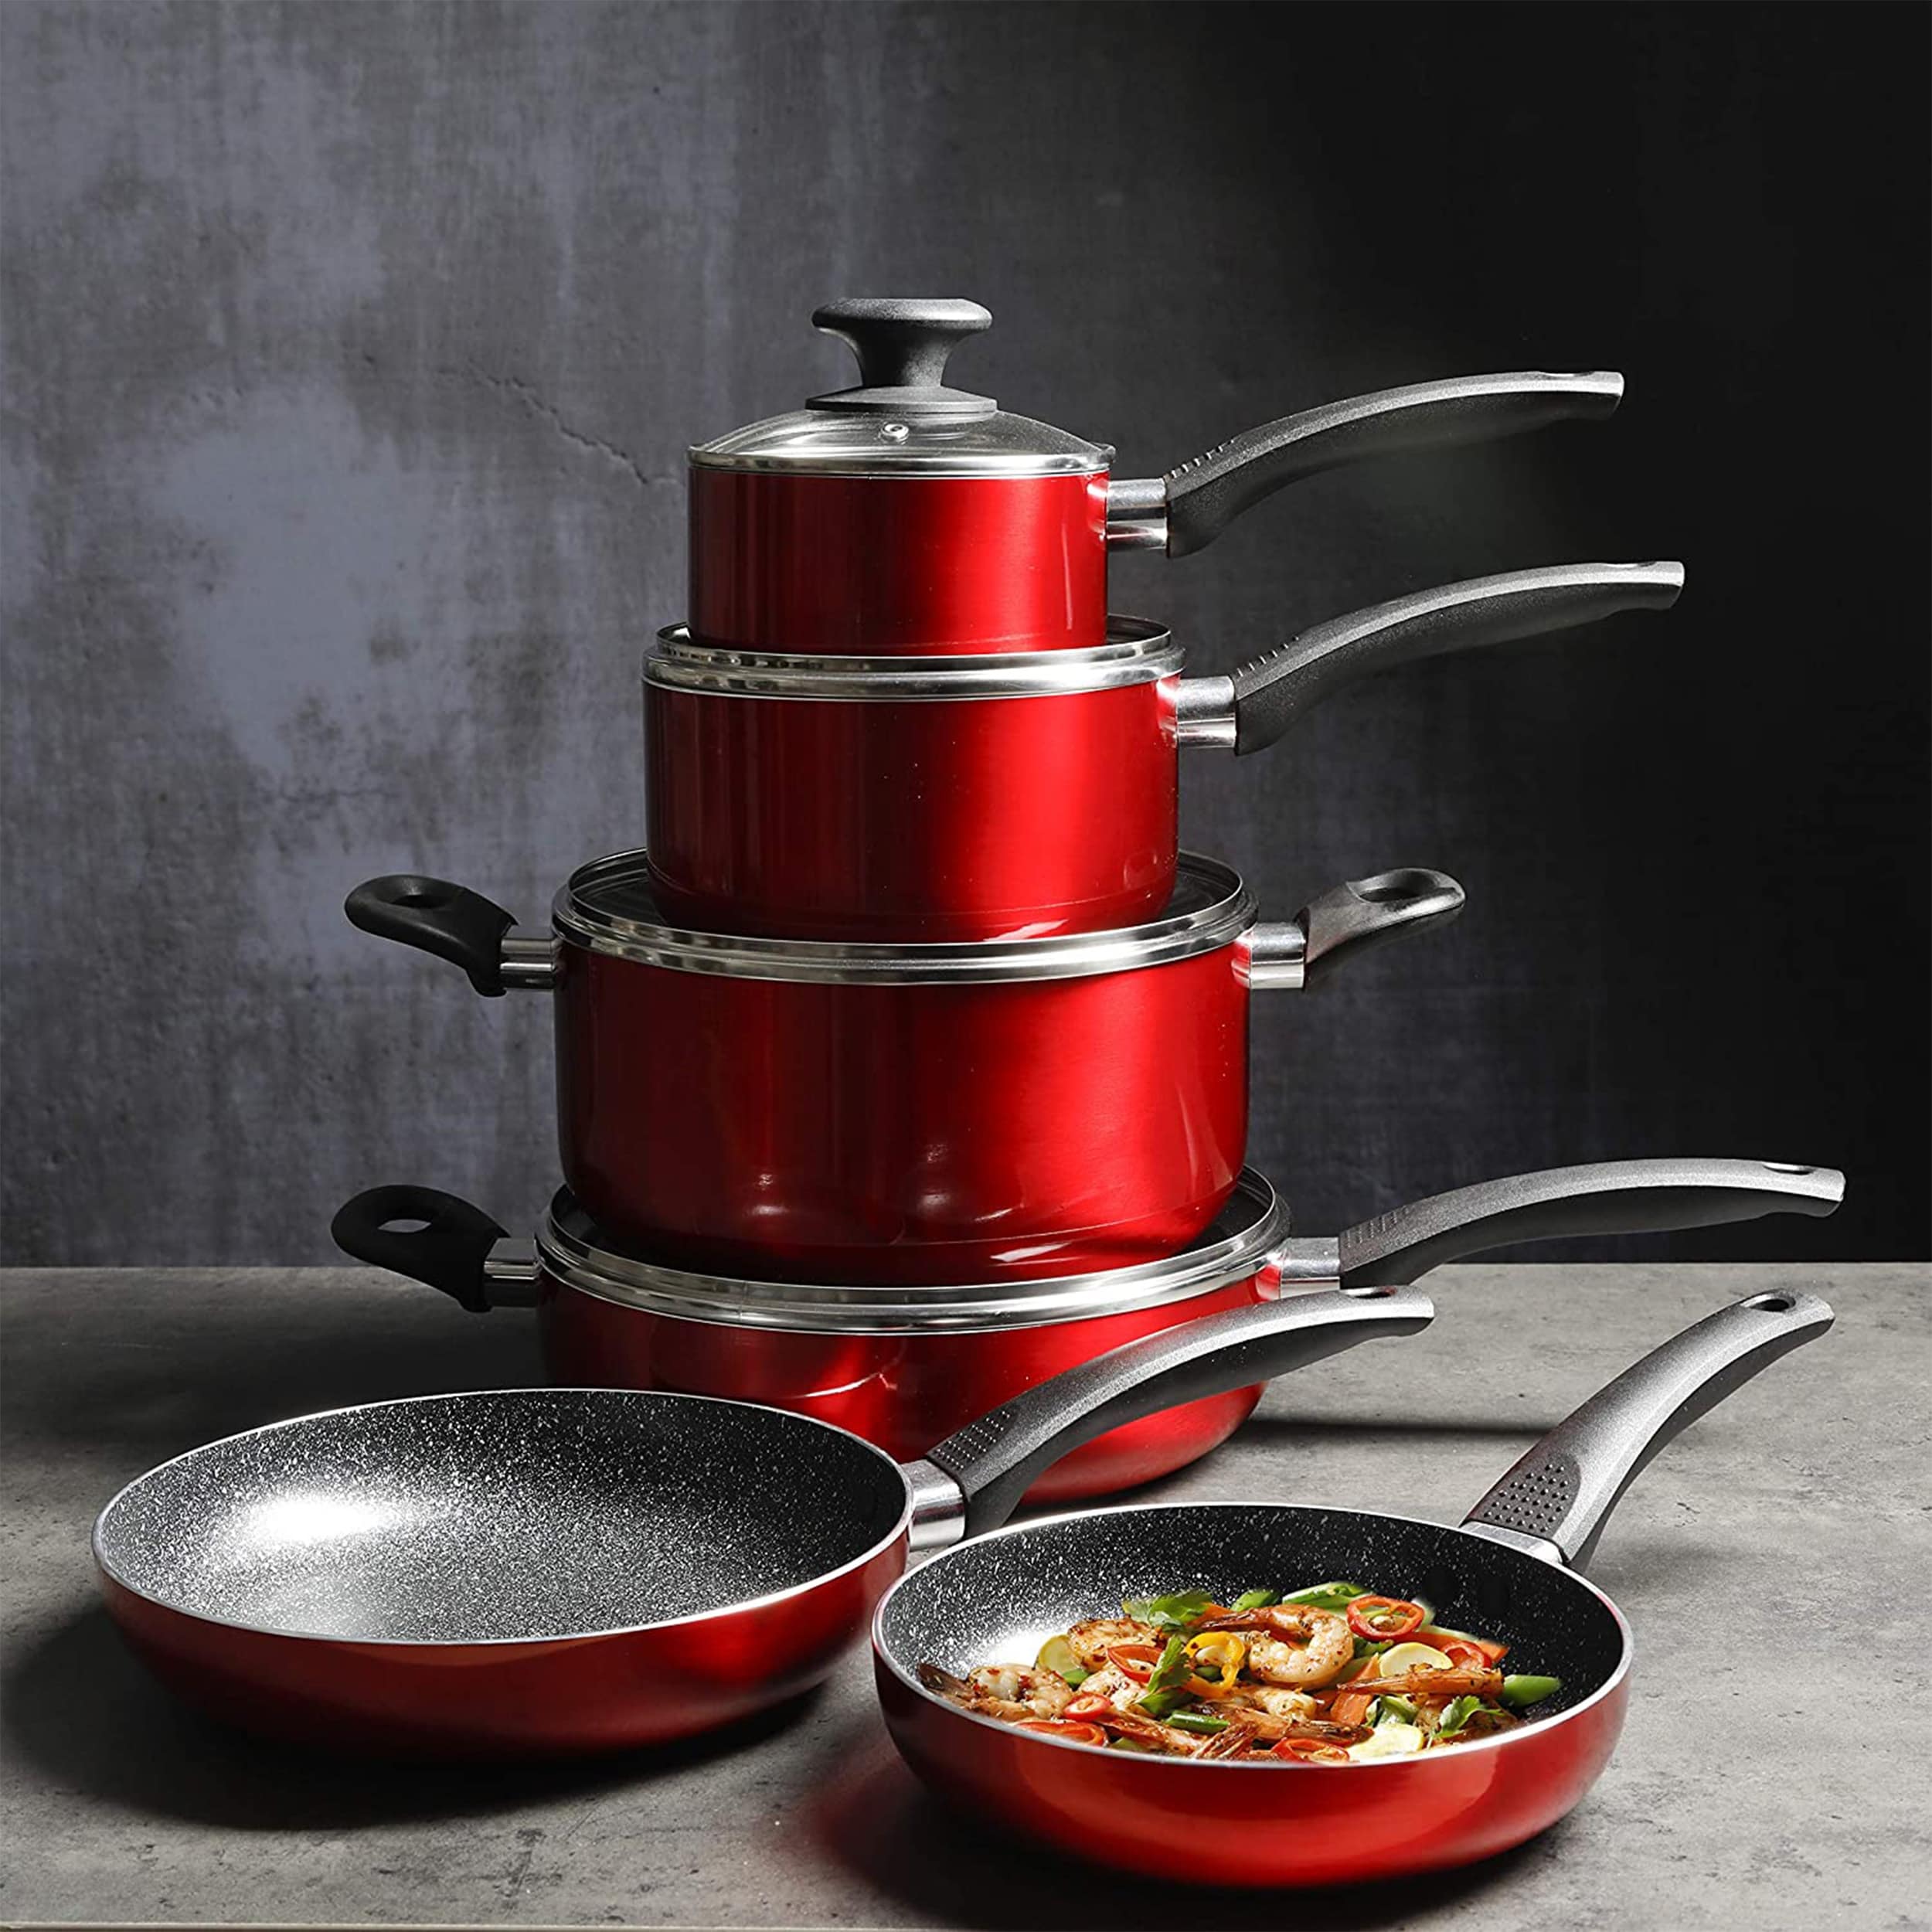 https://ak1.ostkcdn.com/images/products/is/images/direct/663e8ba509cc5606811e25dbd3ac78ff94edf3ba/Oster-Merrion-10-Piece-Nonstick-Aluminum-Cookware-Set-in-Red.jpg